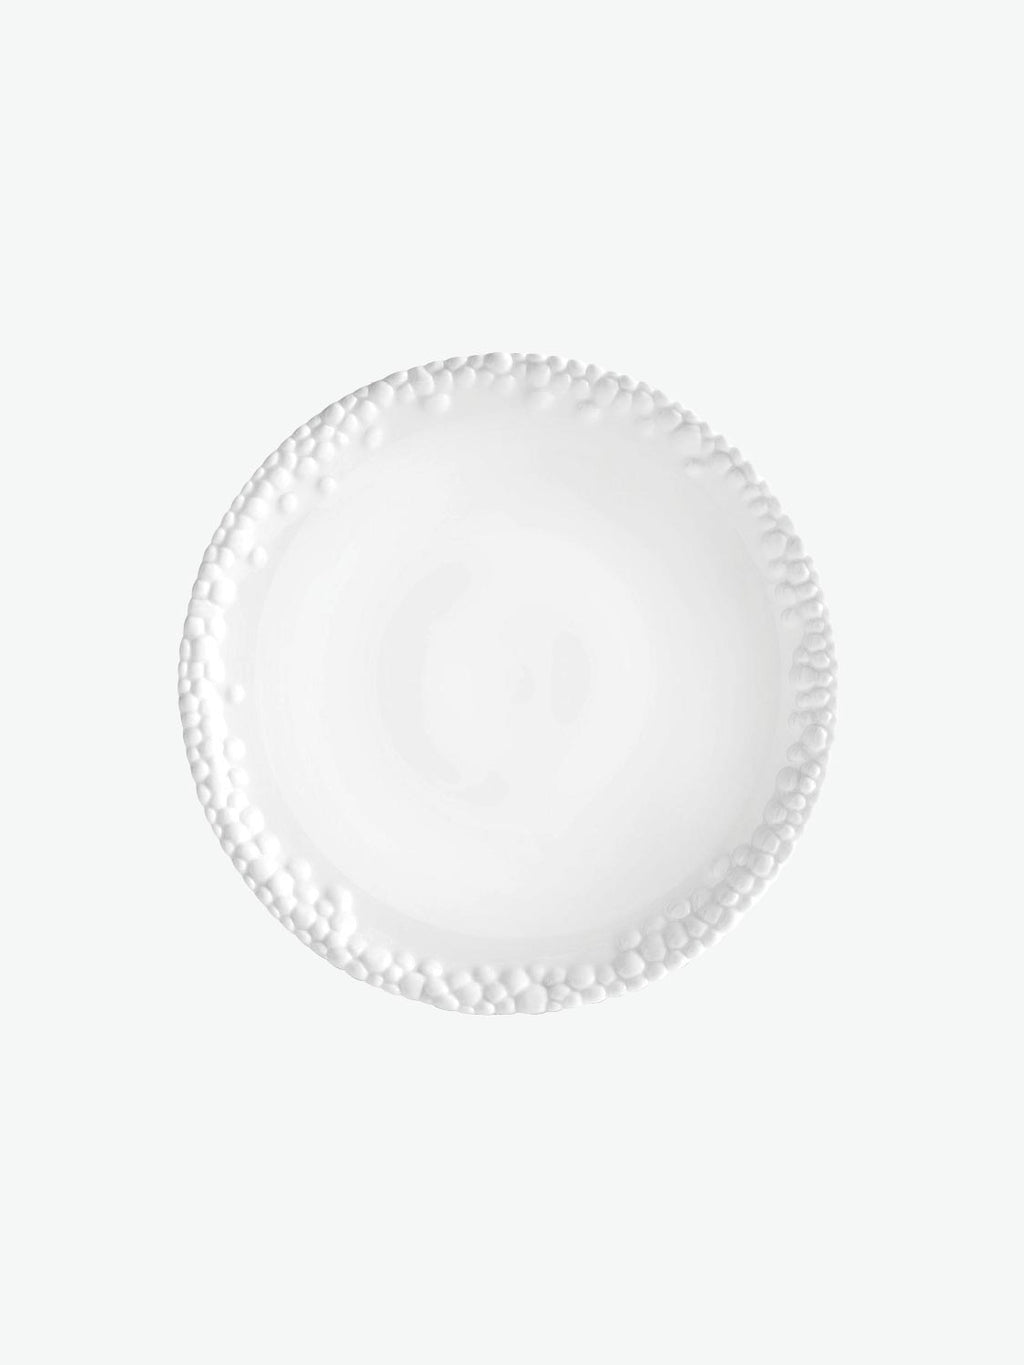 Haas Mojave Bread and Butter Plate | A